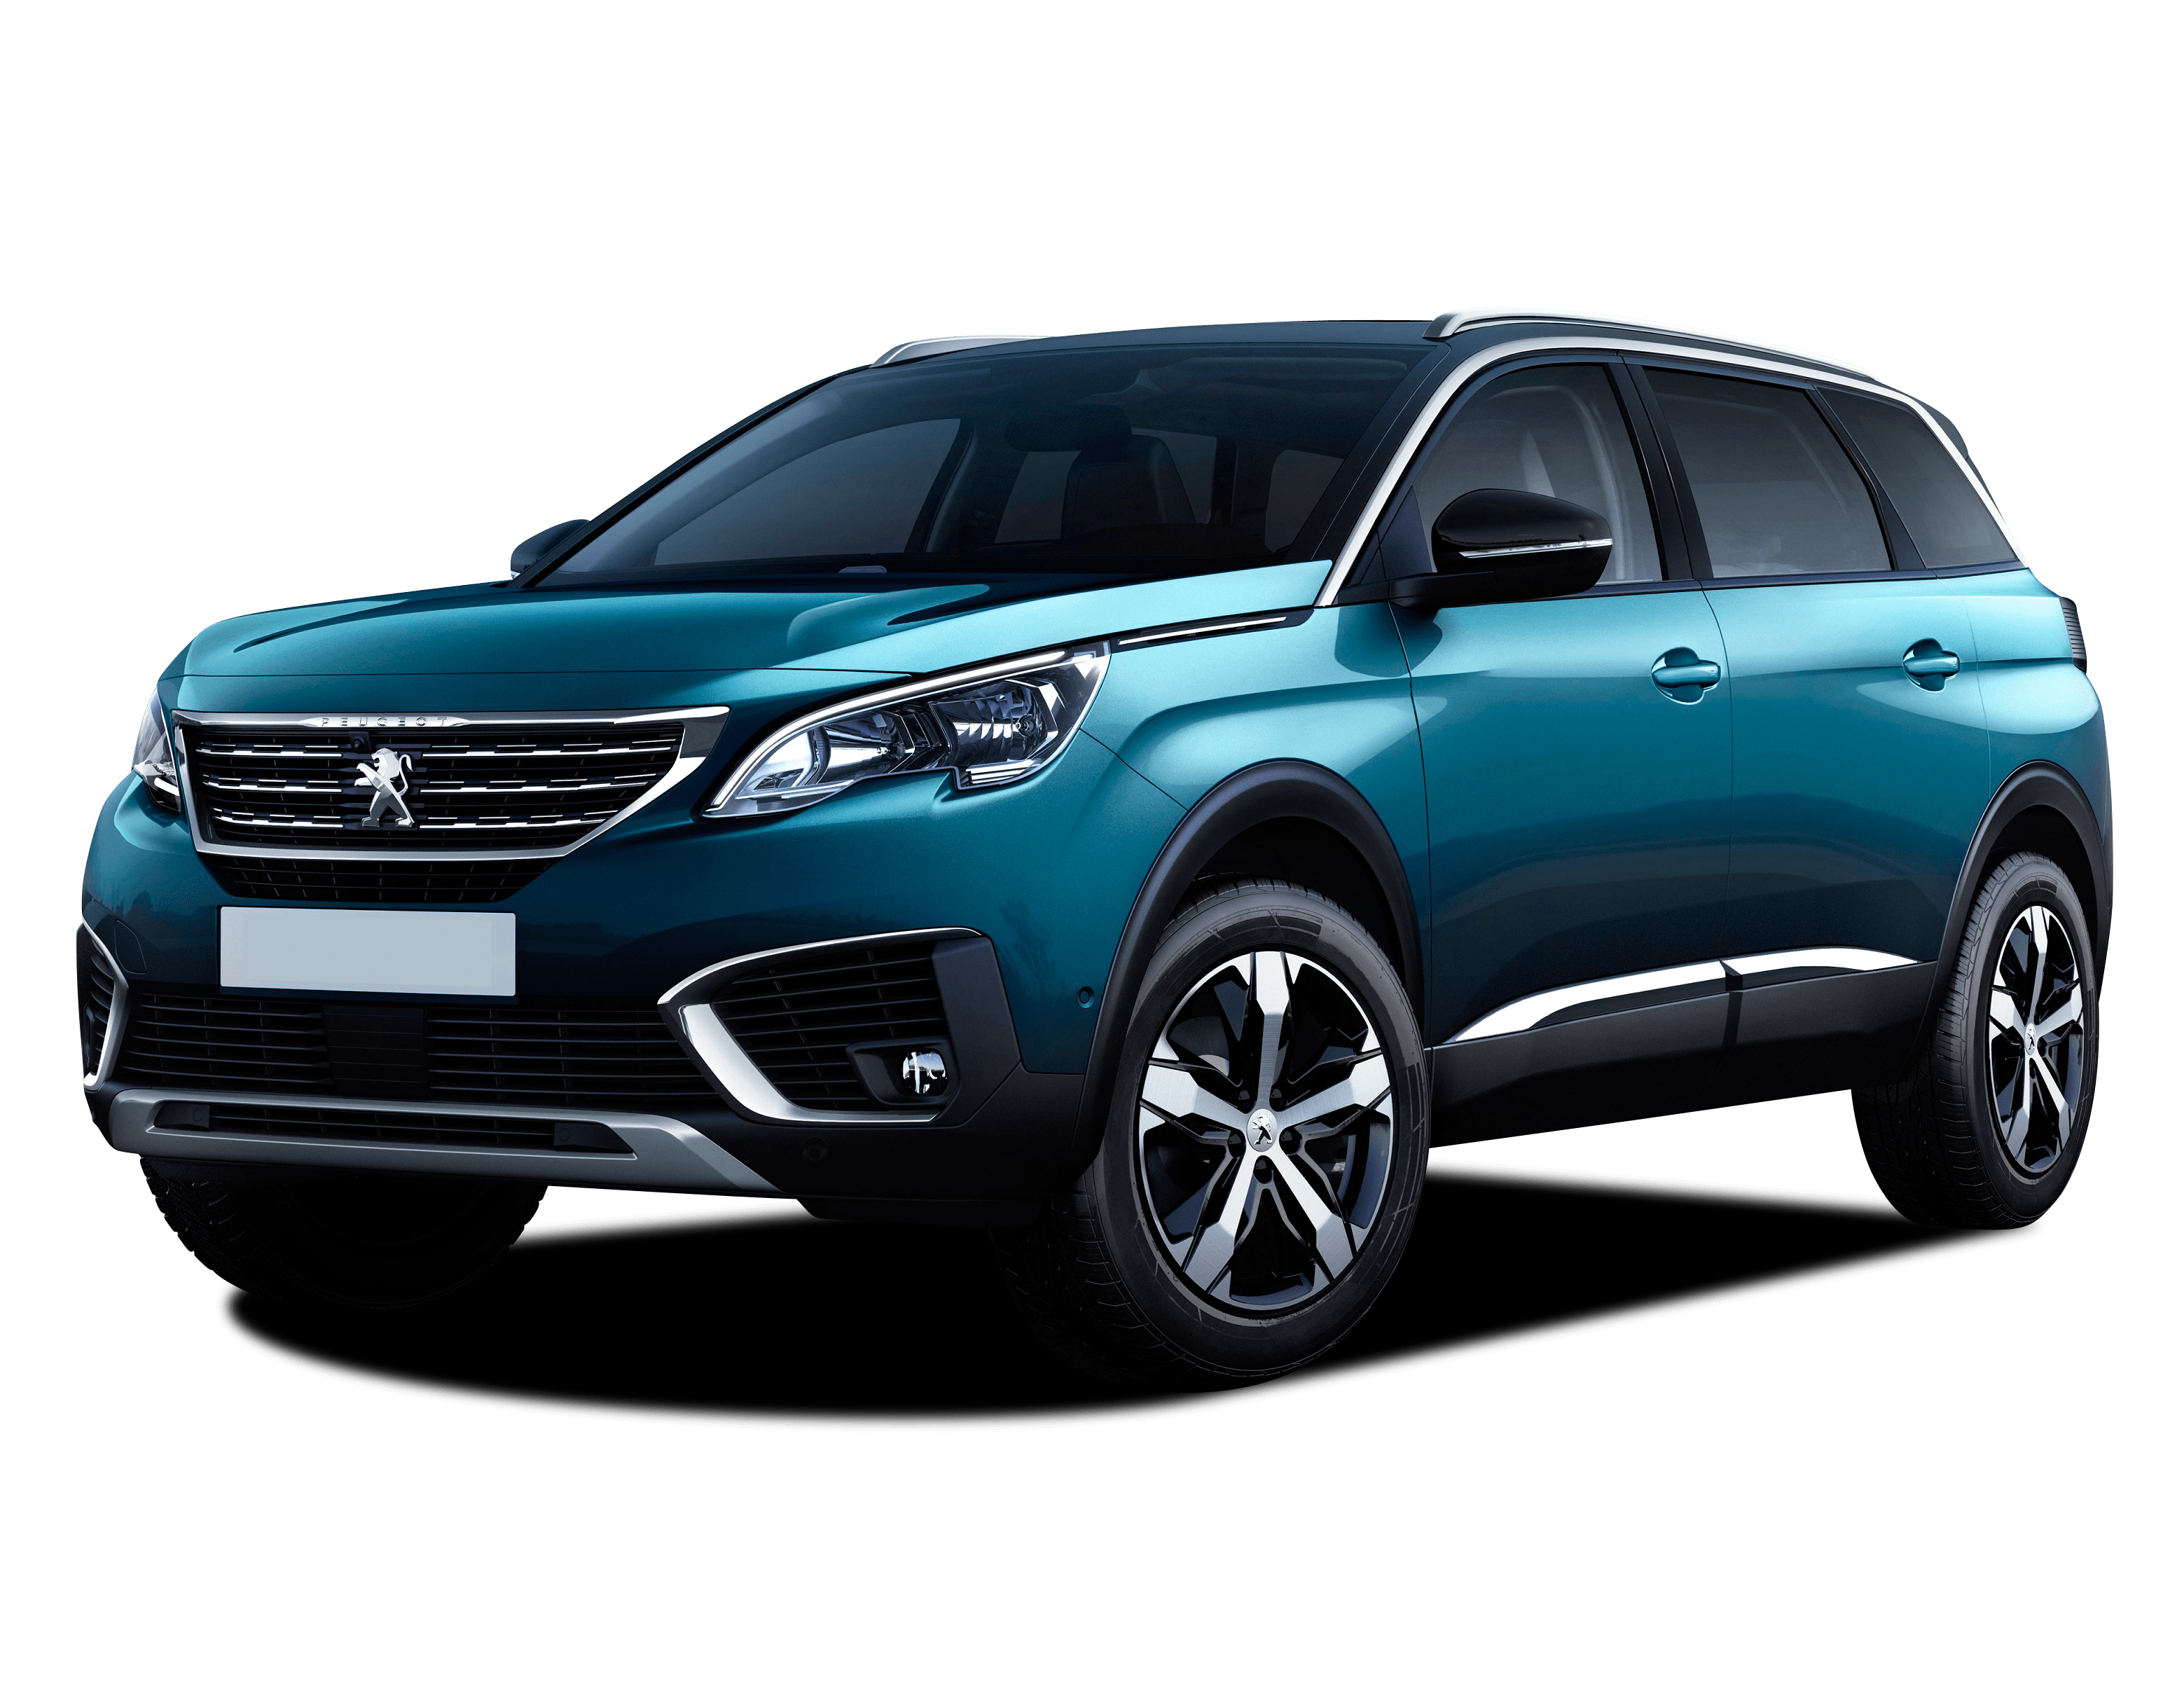 https://carsguide-res.cloudinary.com/image/upload/f_auto,fl_lossy,q_auto,t_default/v1/editorial/Peugeot-5008-2018-icon.png